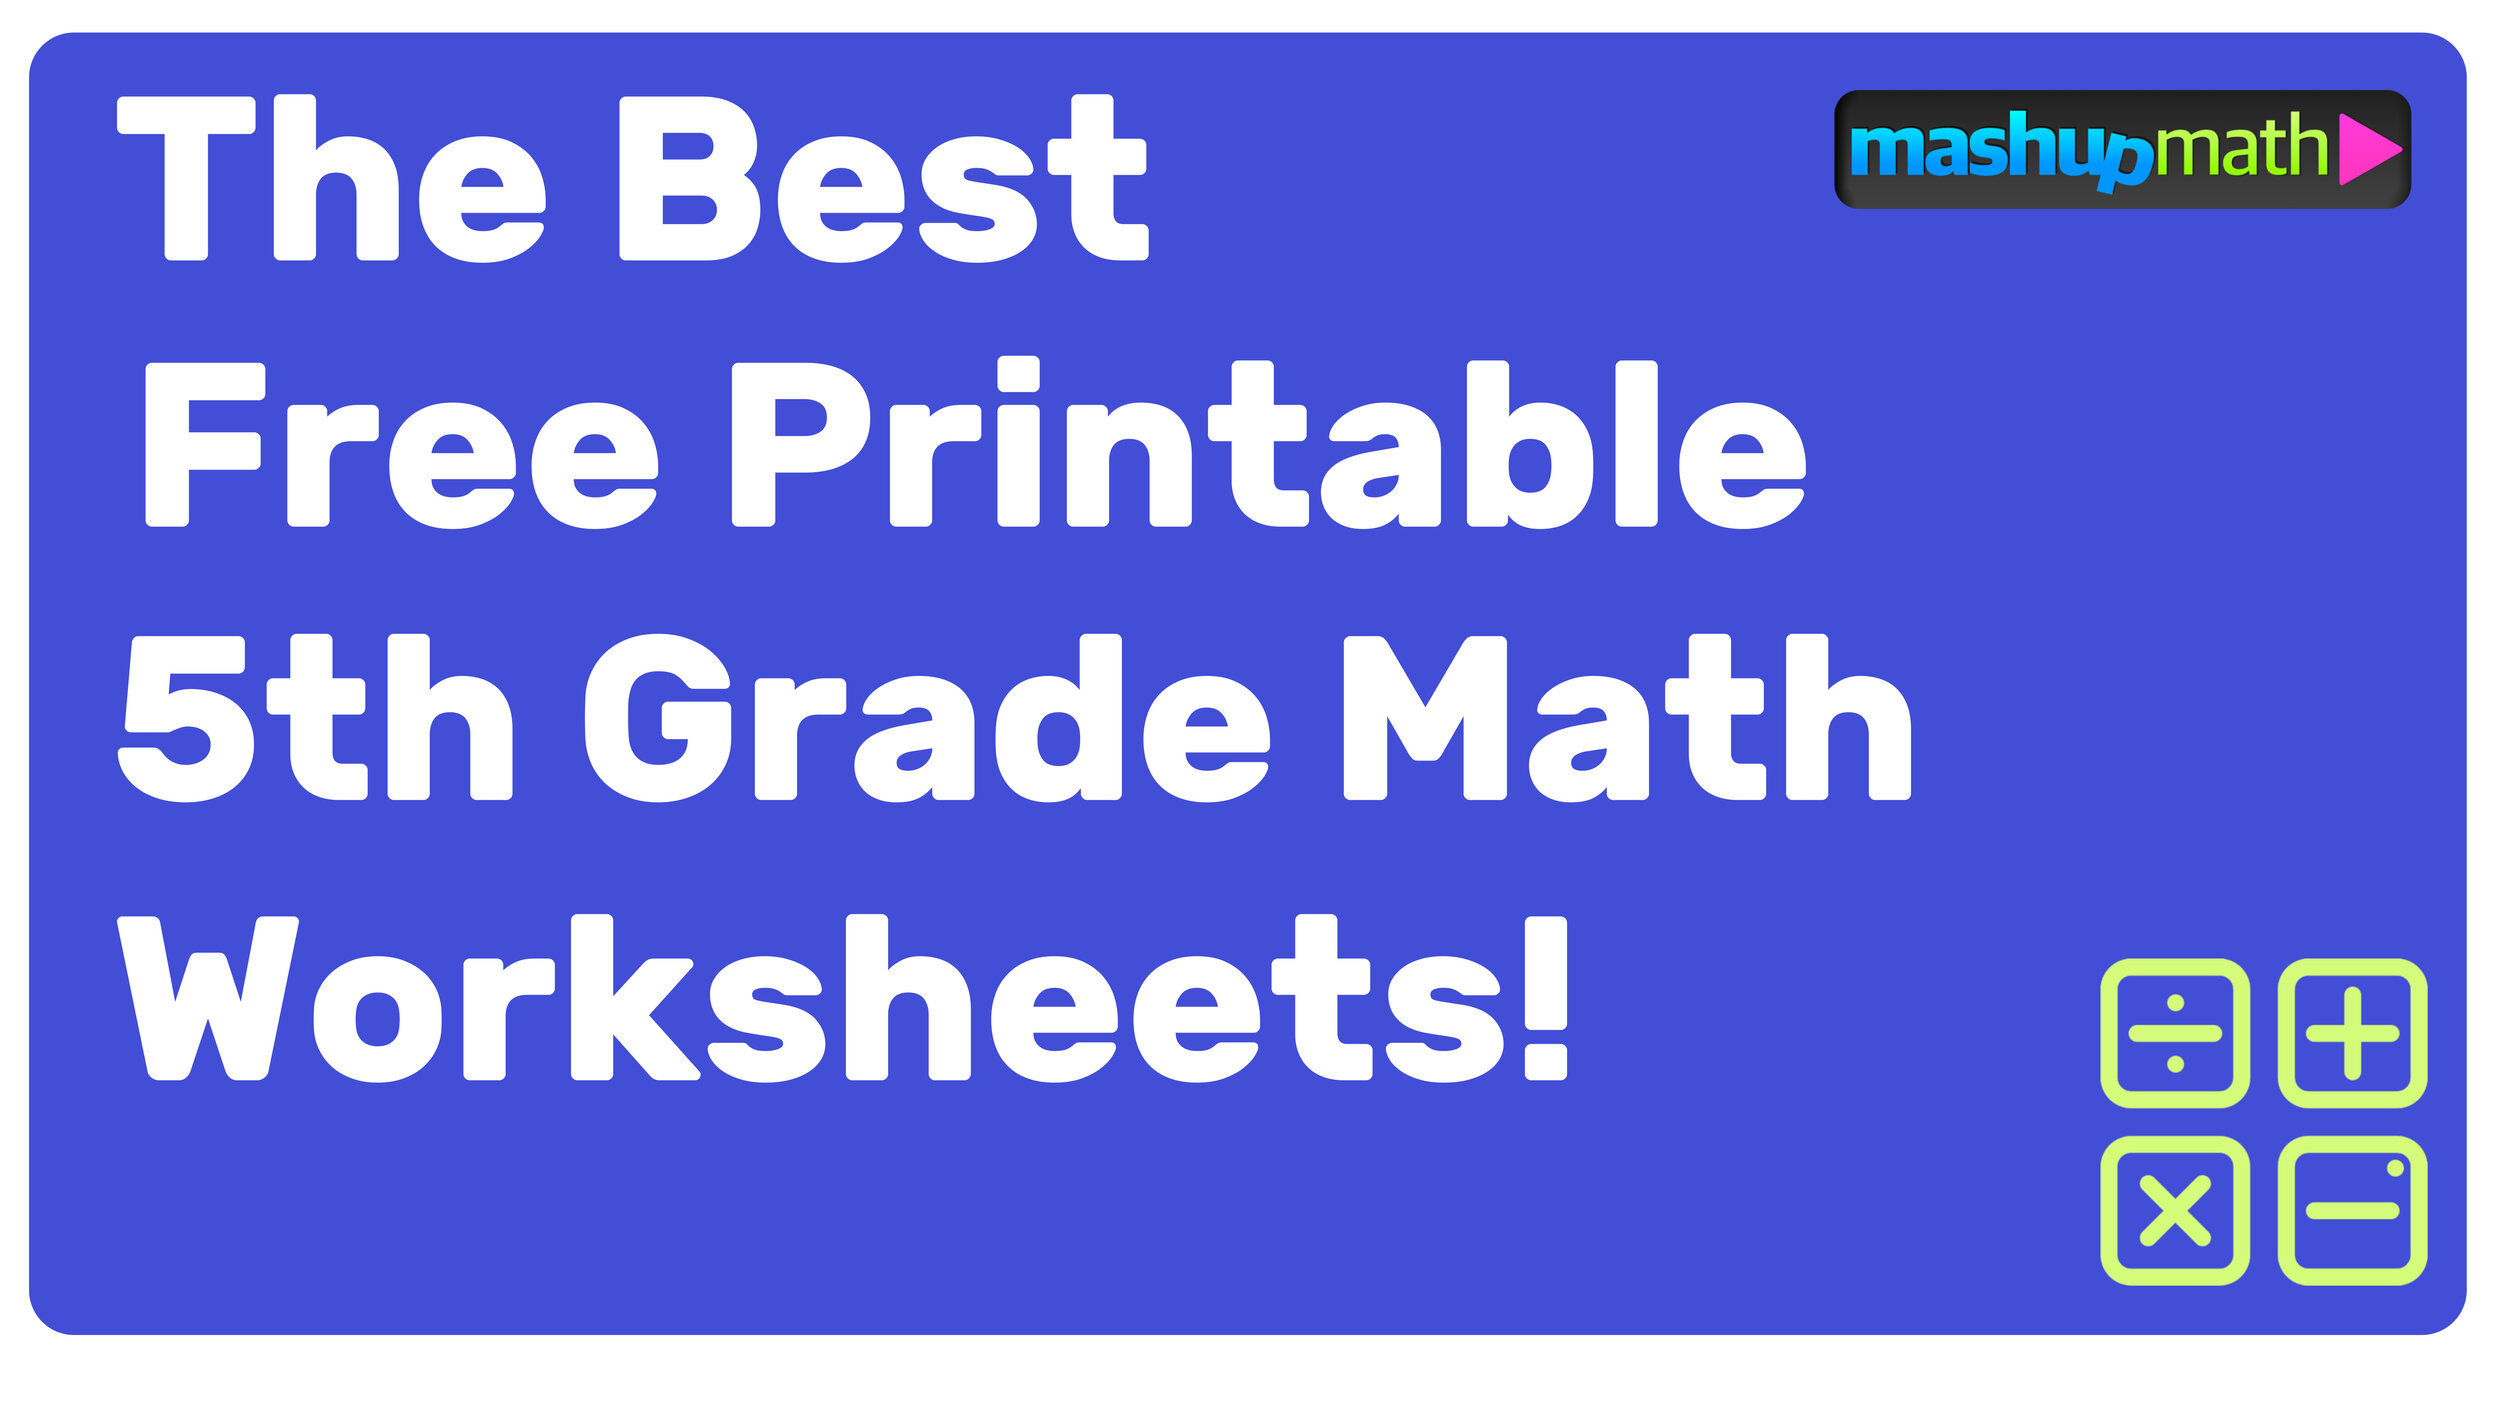 The Best Free Printable 5th Grade Math Worksheets (and Answers!)